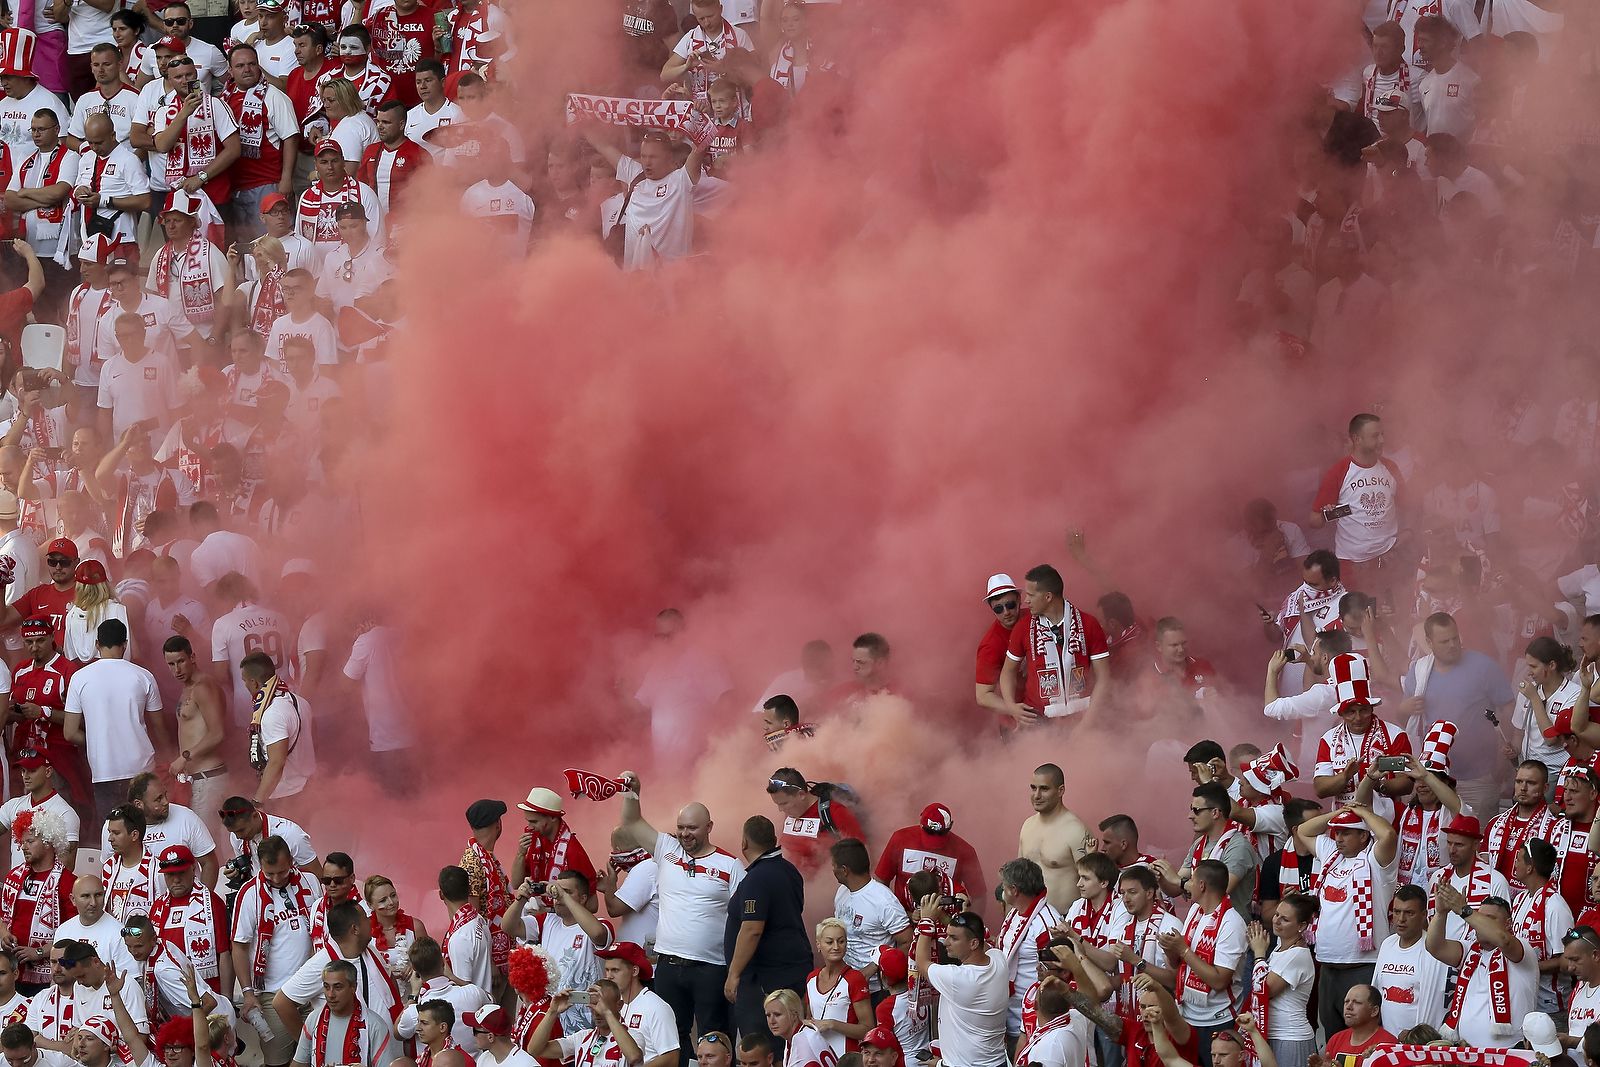 Poland fans let off a smoke flare